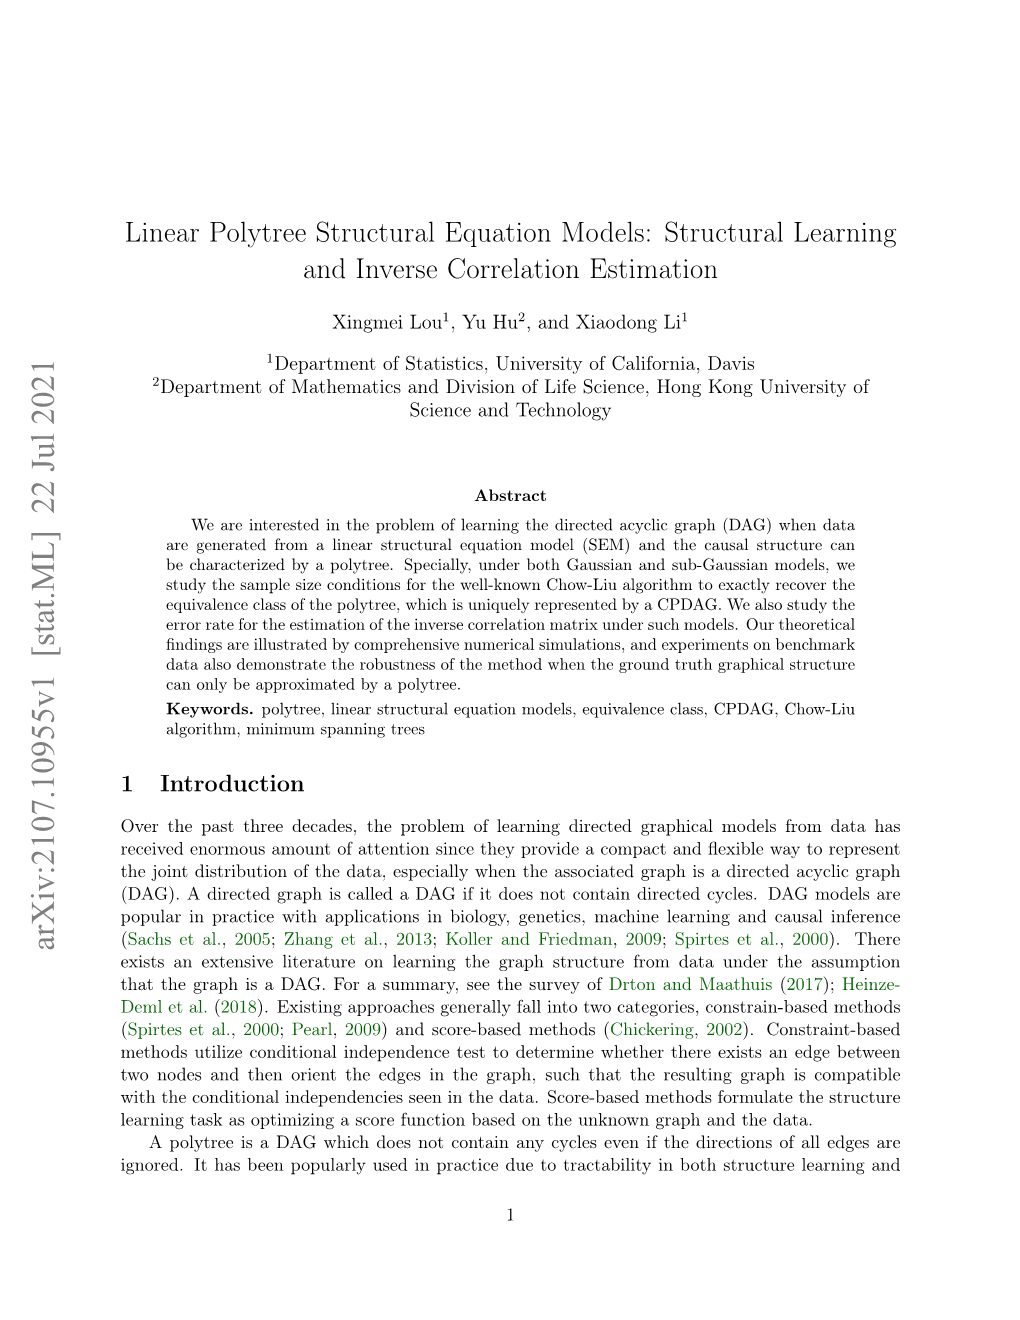 Linear Polytree Structural Equation Models: Structural Learning and Inverse Correlation Estimation